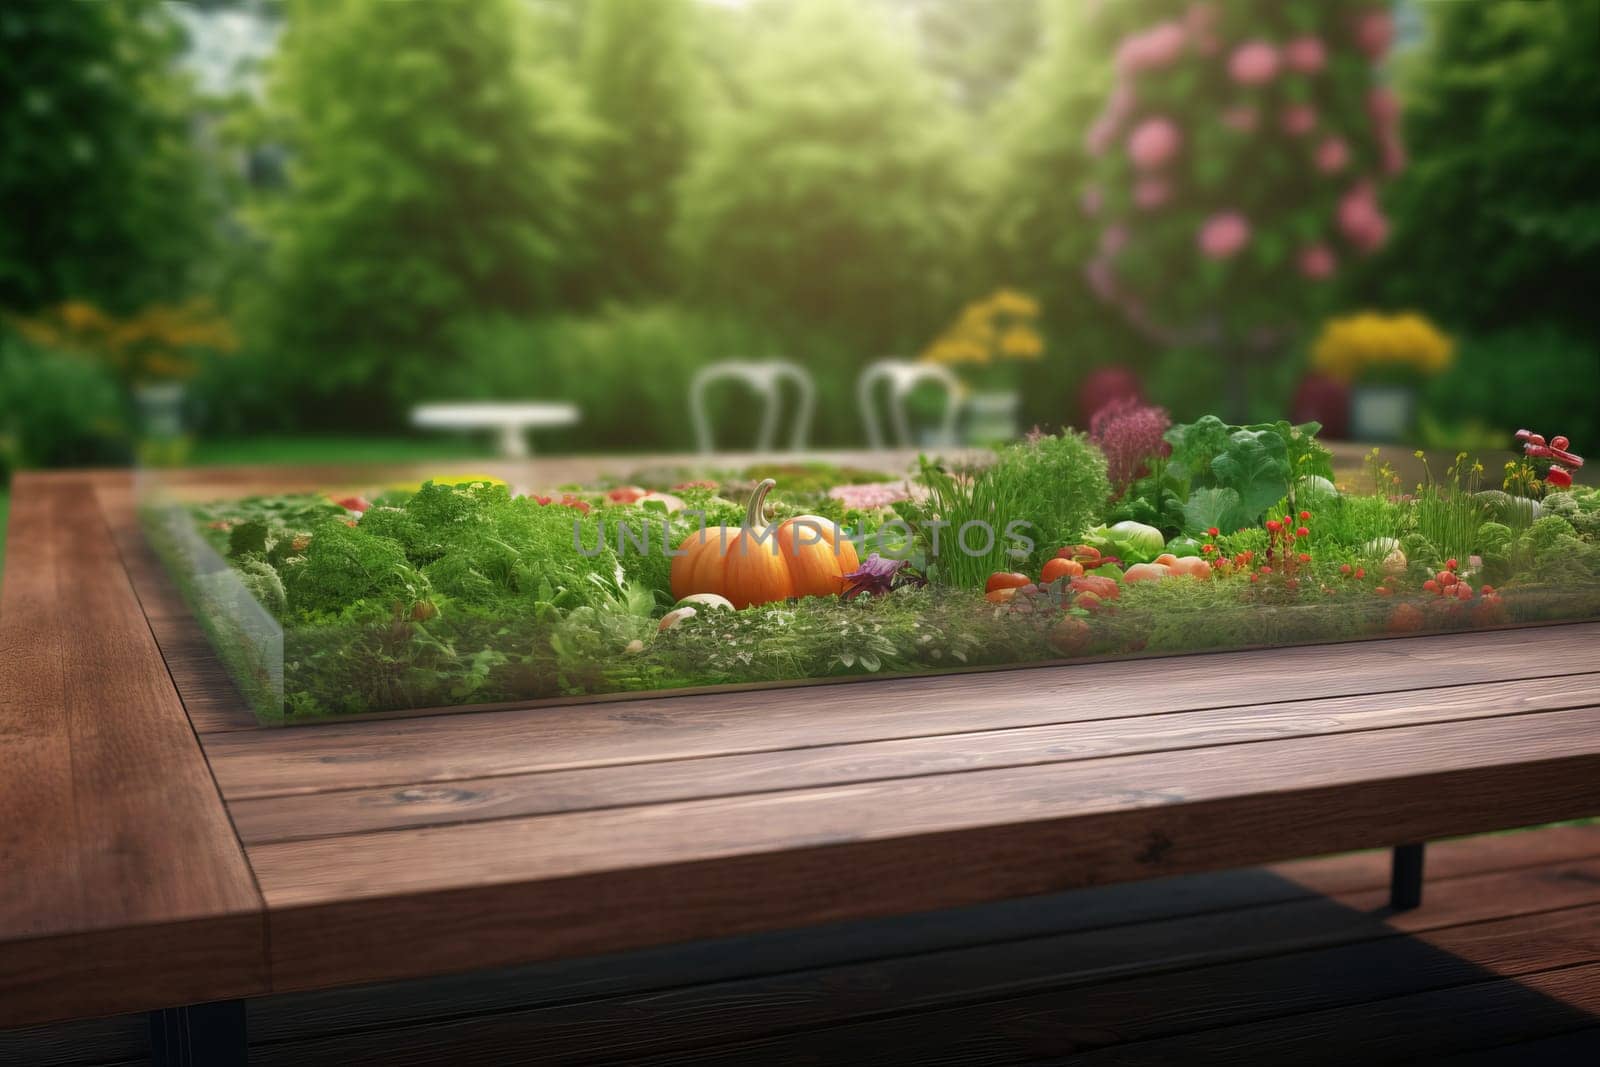 Assorted organic herbs and vegetables lie on a wooden table in the garden .